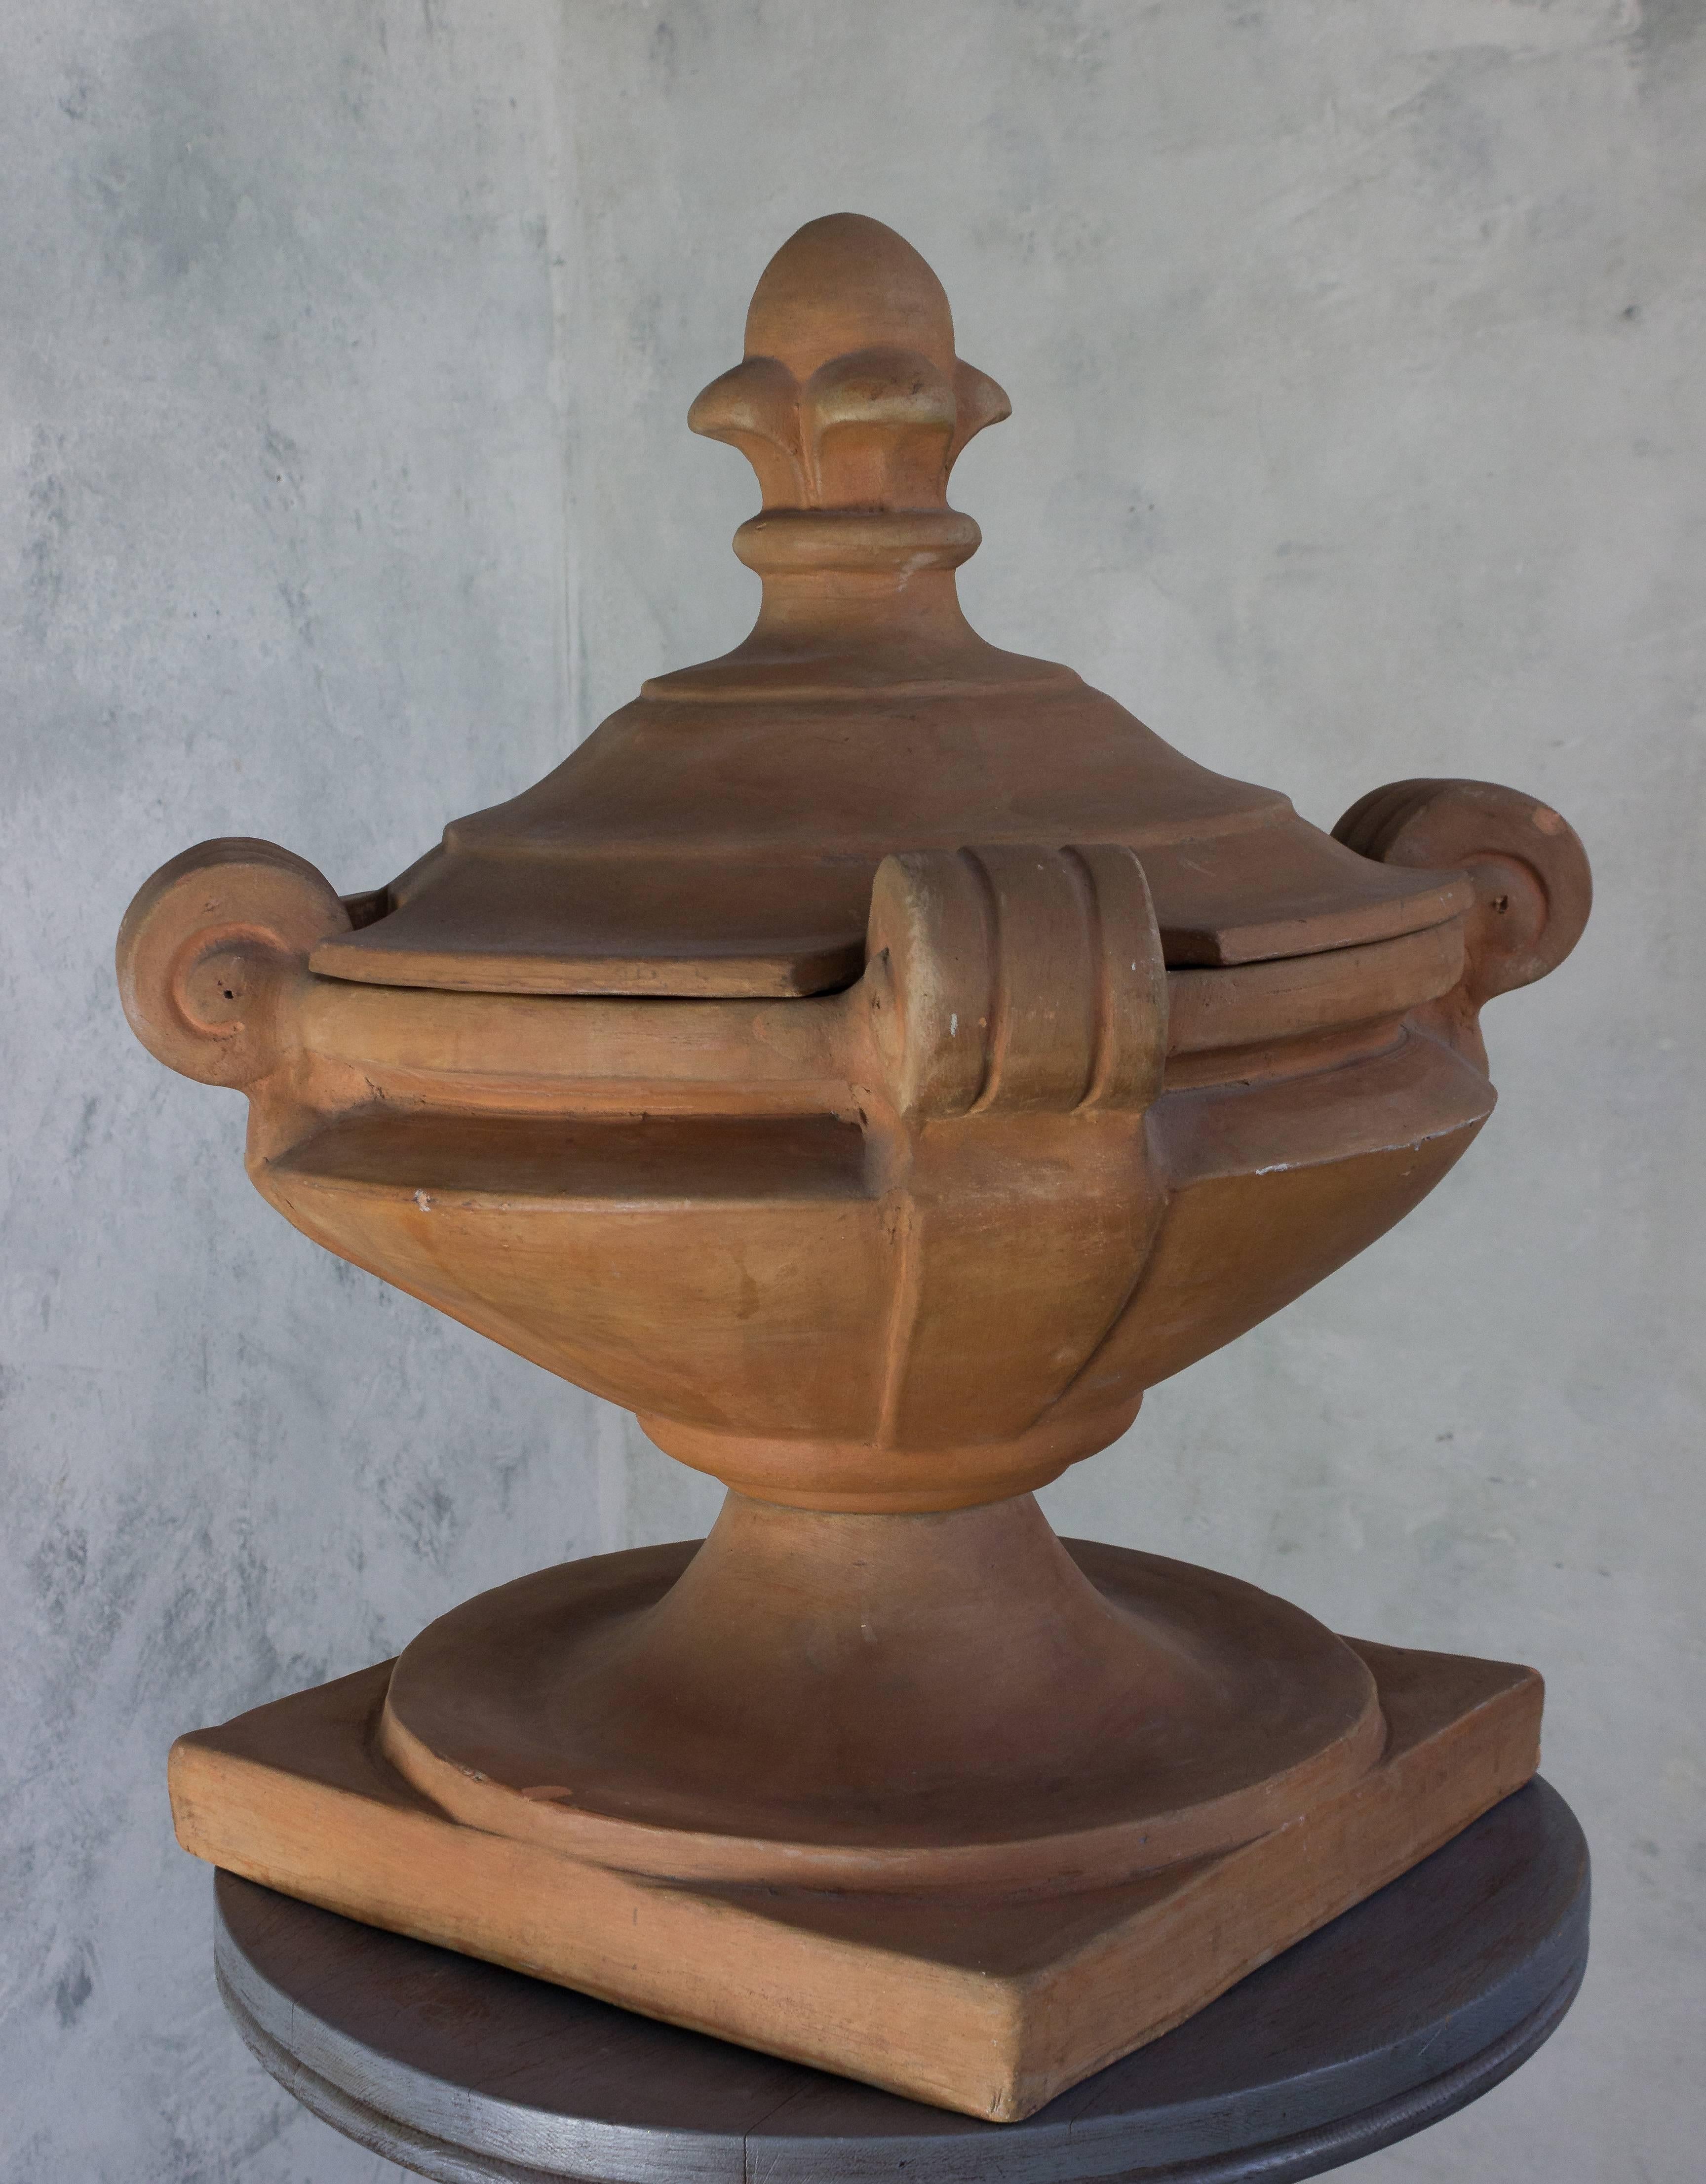 Add a touch of France to your home with this charming 1920s decorative terra cotta covered urn. This timeless piece will bring charm and sophistication to any living space, and its classic design gives it a unique appeal. Whether you choose to use